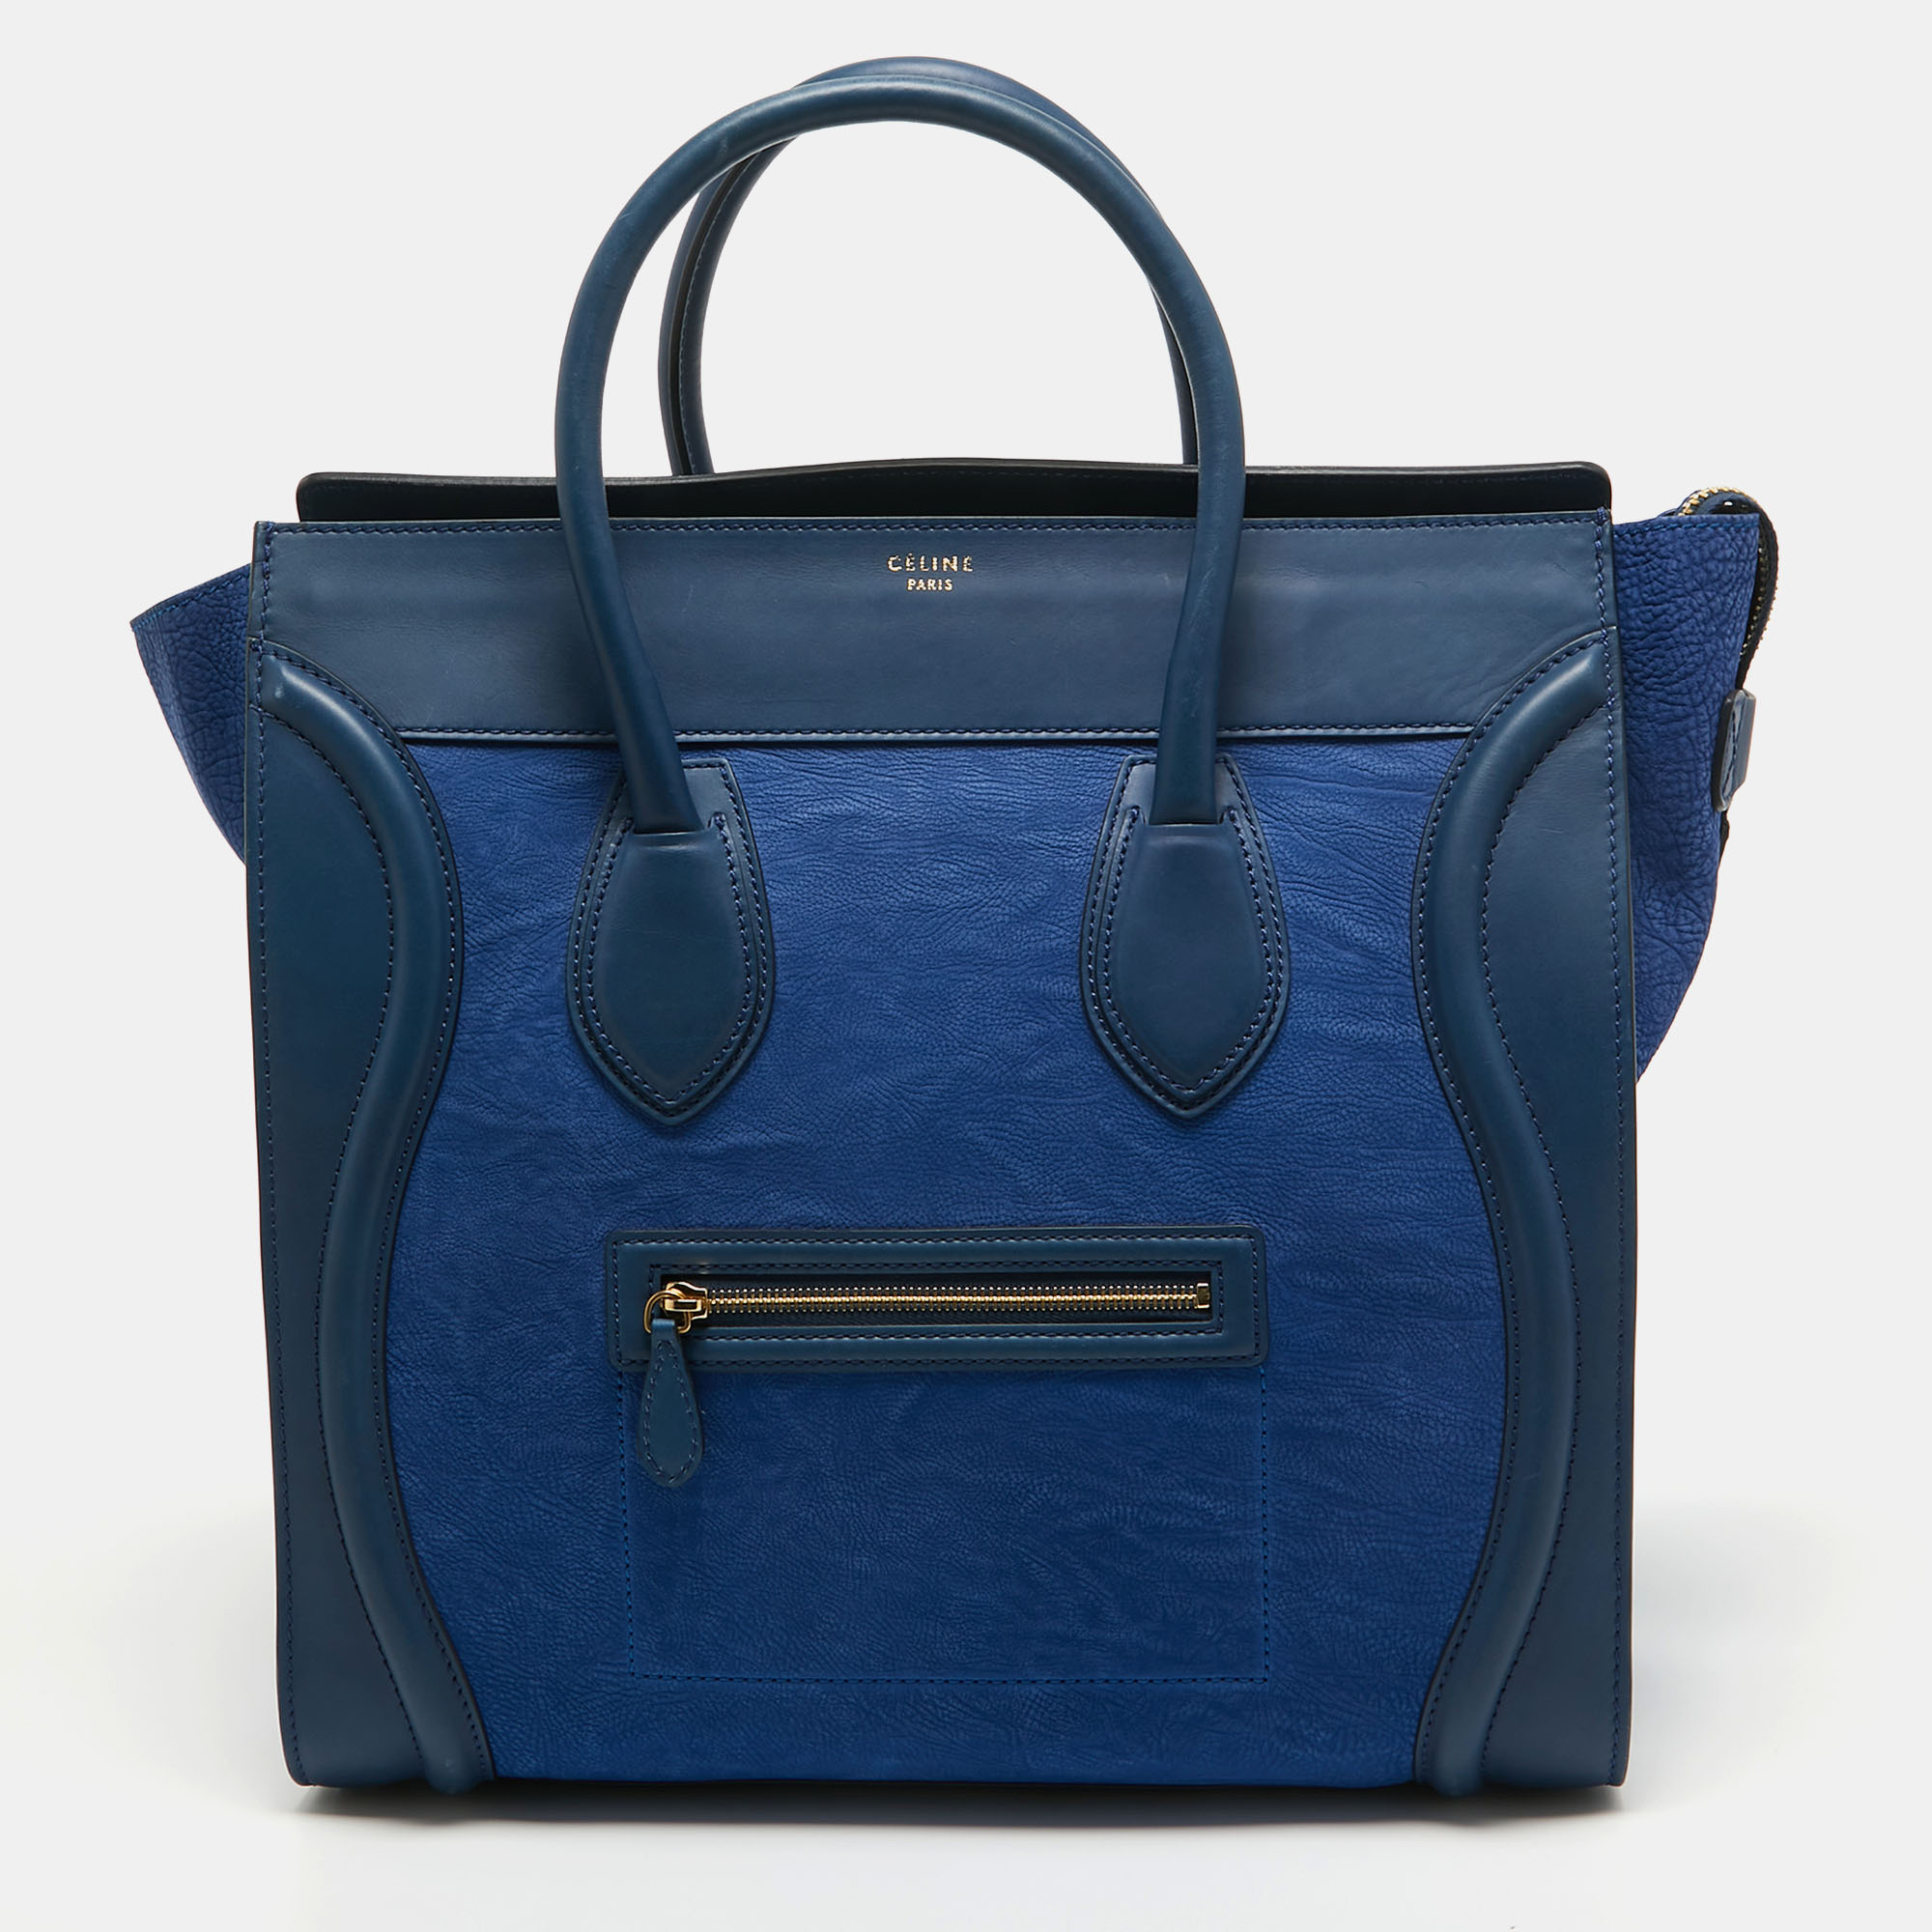 The usage of two tone blue leather on the exterior gives this Celine tote a high appeal. An eye catching accessory the bag features a front zipper pocket dual handles at the top and gold tone hardware. The leather lined interior is equipped to store more than just your phone and tiny essentials. The flappy wings at the sides and the brand signature on the front complete this design.